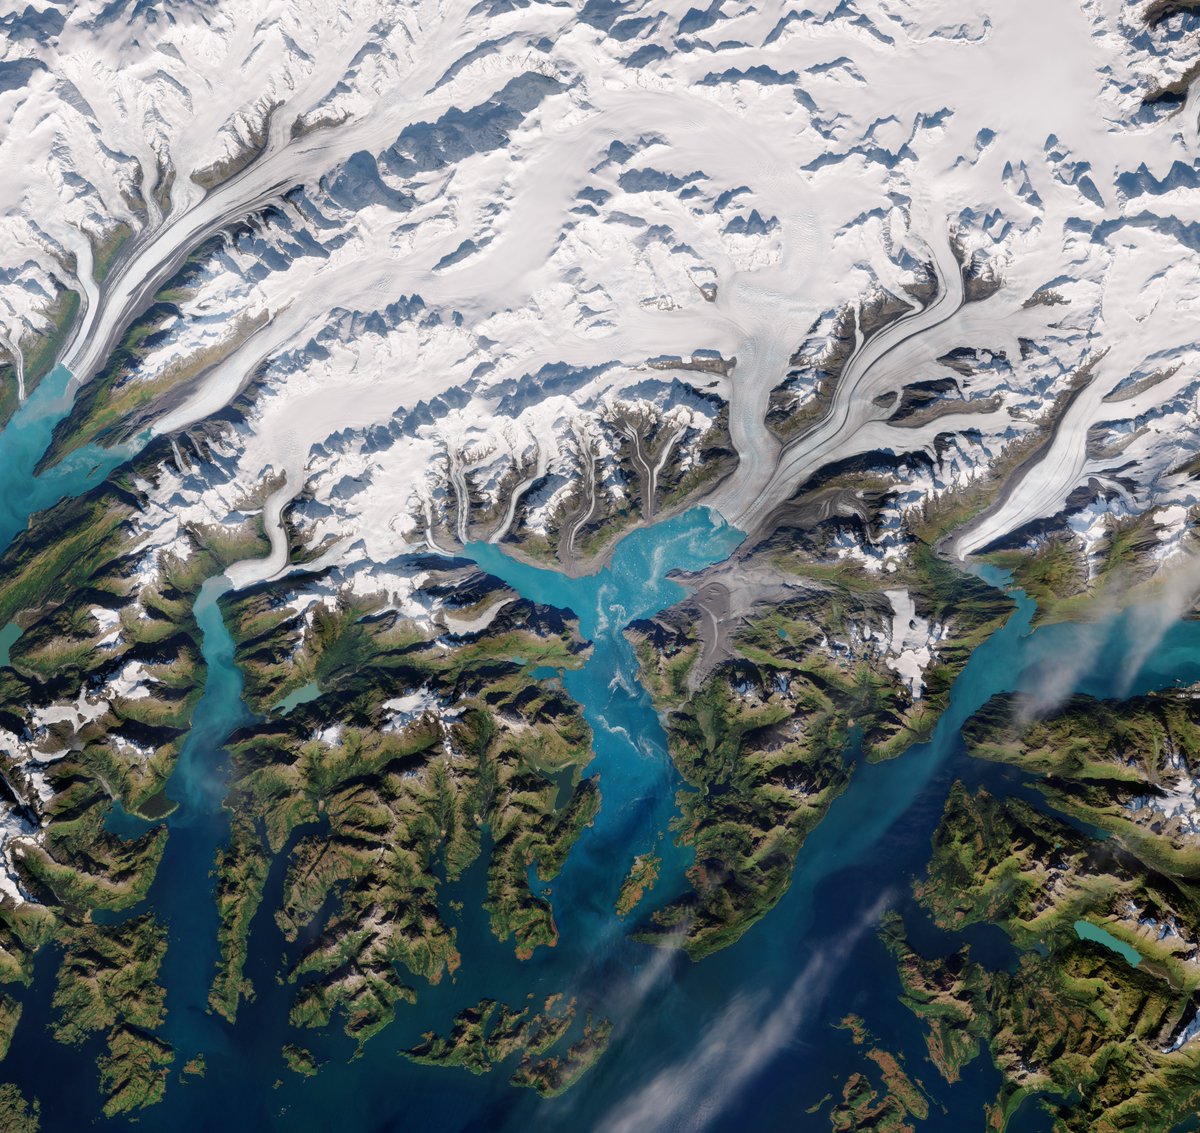 📷 This week's #EarthFromSpace features a @CopernicusEU #Sentinel2 image of Alaska’s Columbia Glacier, one of the fastest changing glaciers in the world🧊 

Since the early 1980s, the Columbia Glacier has retreated more than 20 km and lost about half of its total volume. This one